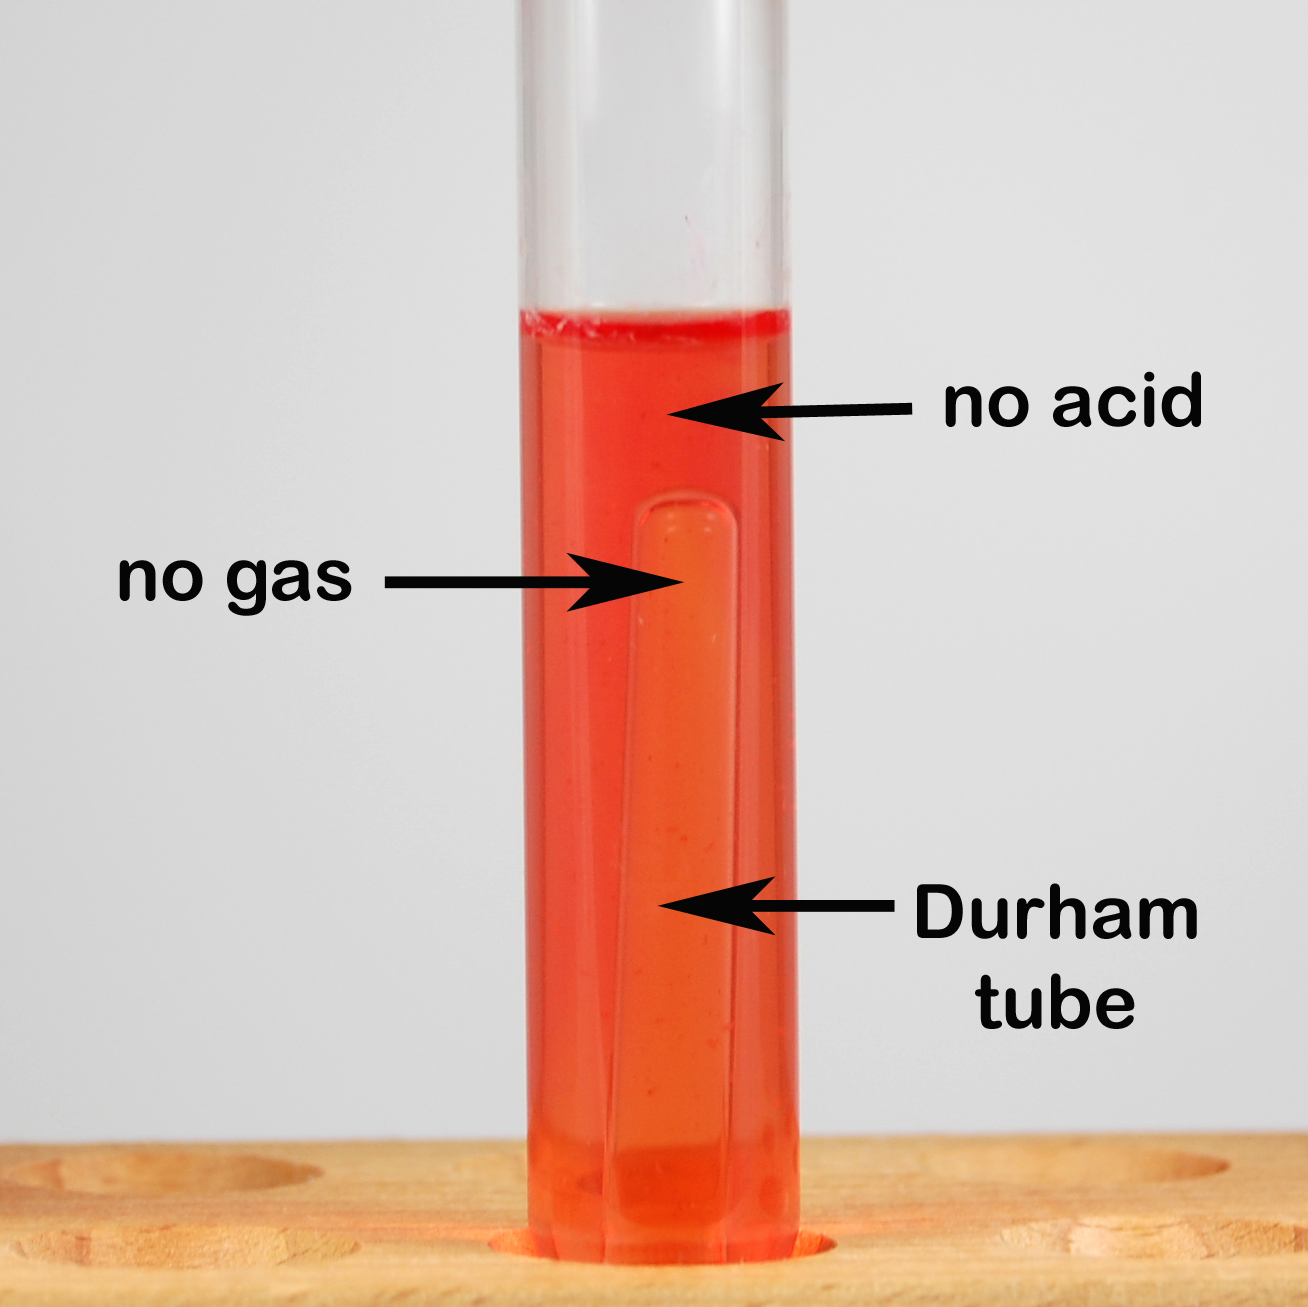 Photograph of a fermentation tube showing no carbohydrate fermentation. The phenol red remains red indicating no acid, and there is no bubble seen at the top of the Durham tube indicating no gas.